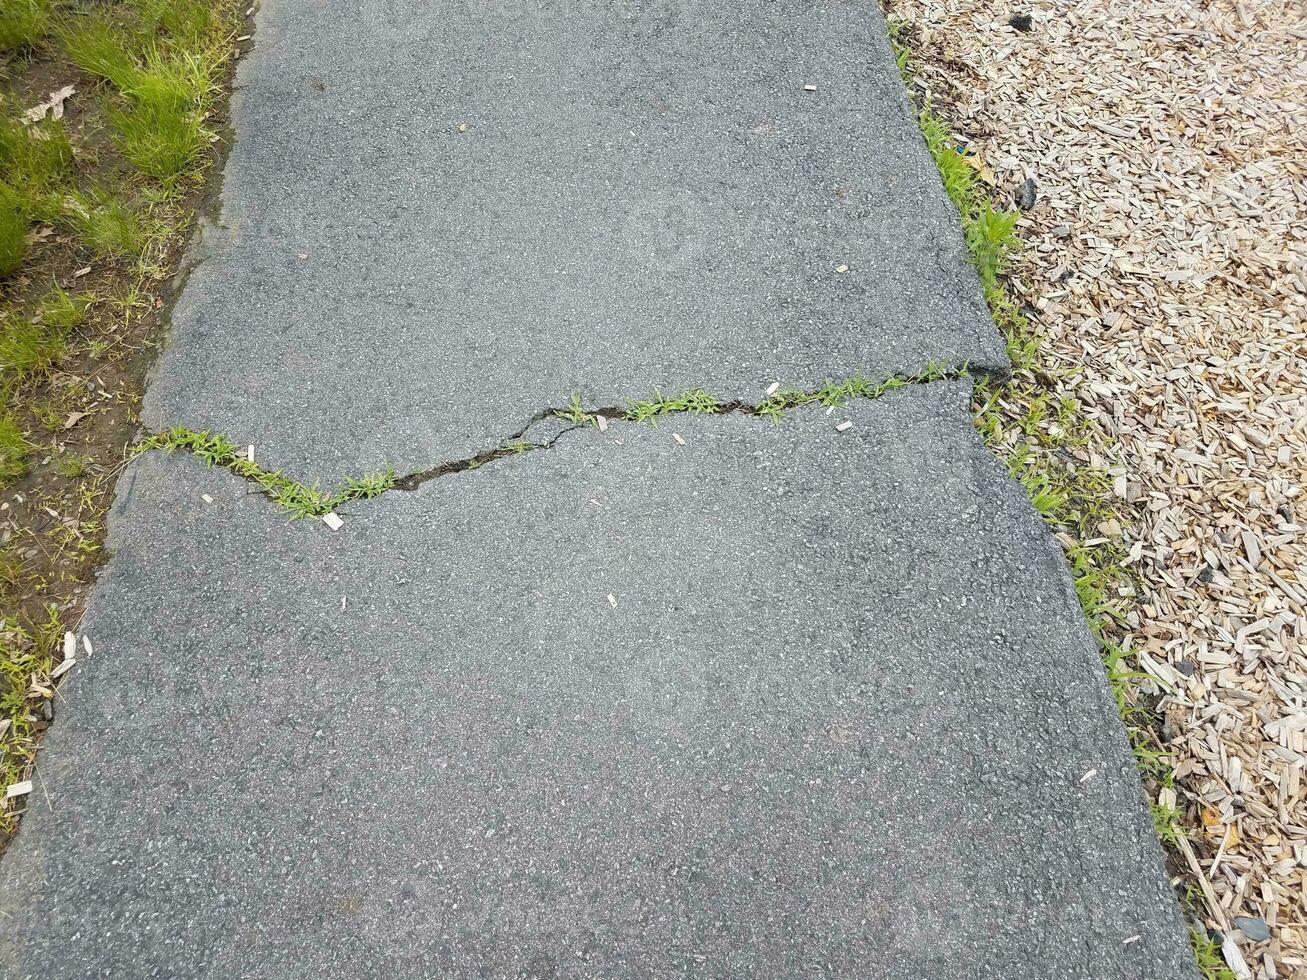 black asphalt trail or path with cracks and grass photo